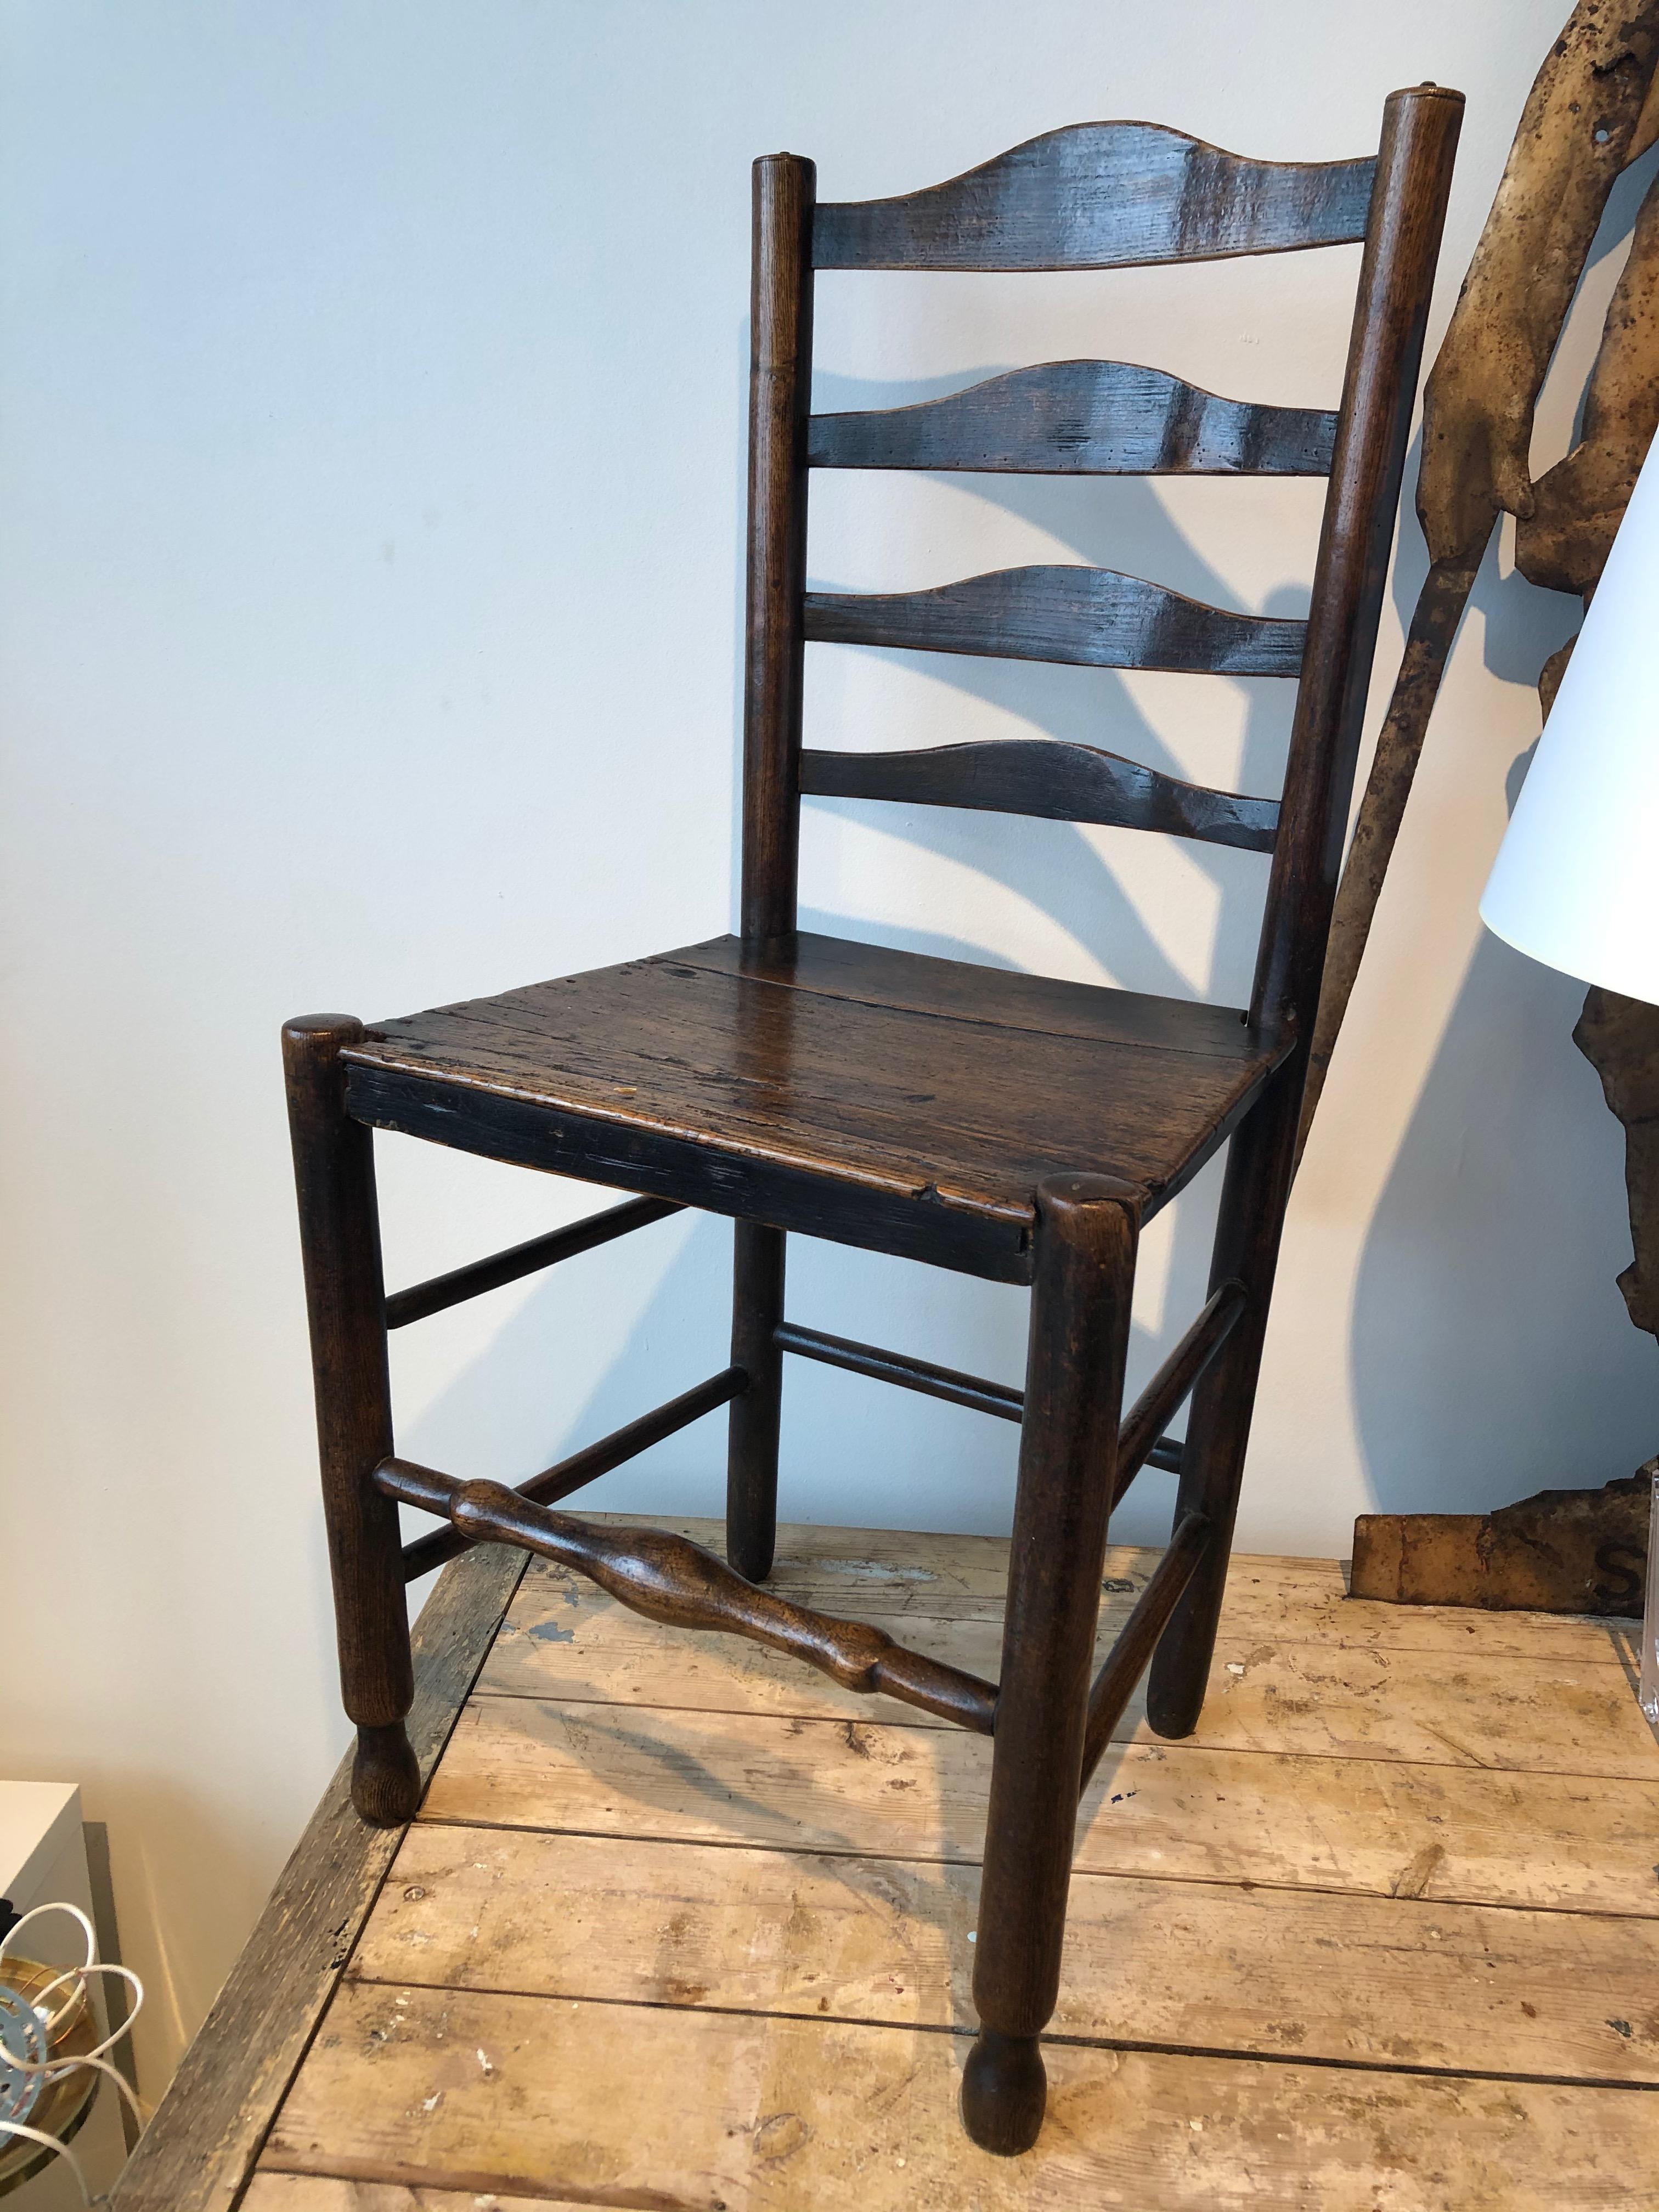 19th century English oak ladder back side chair with wooden seat.